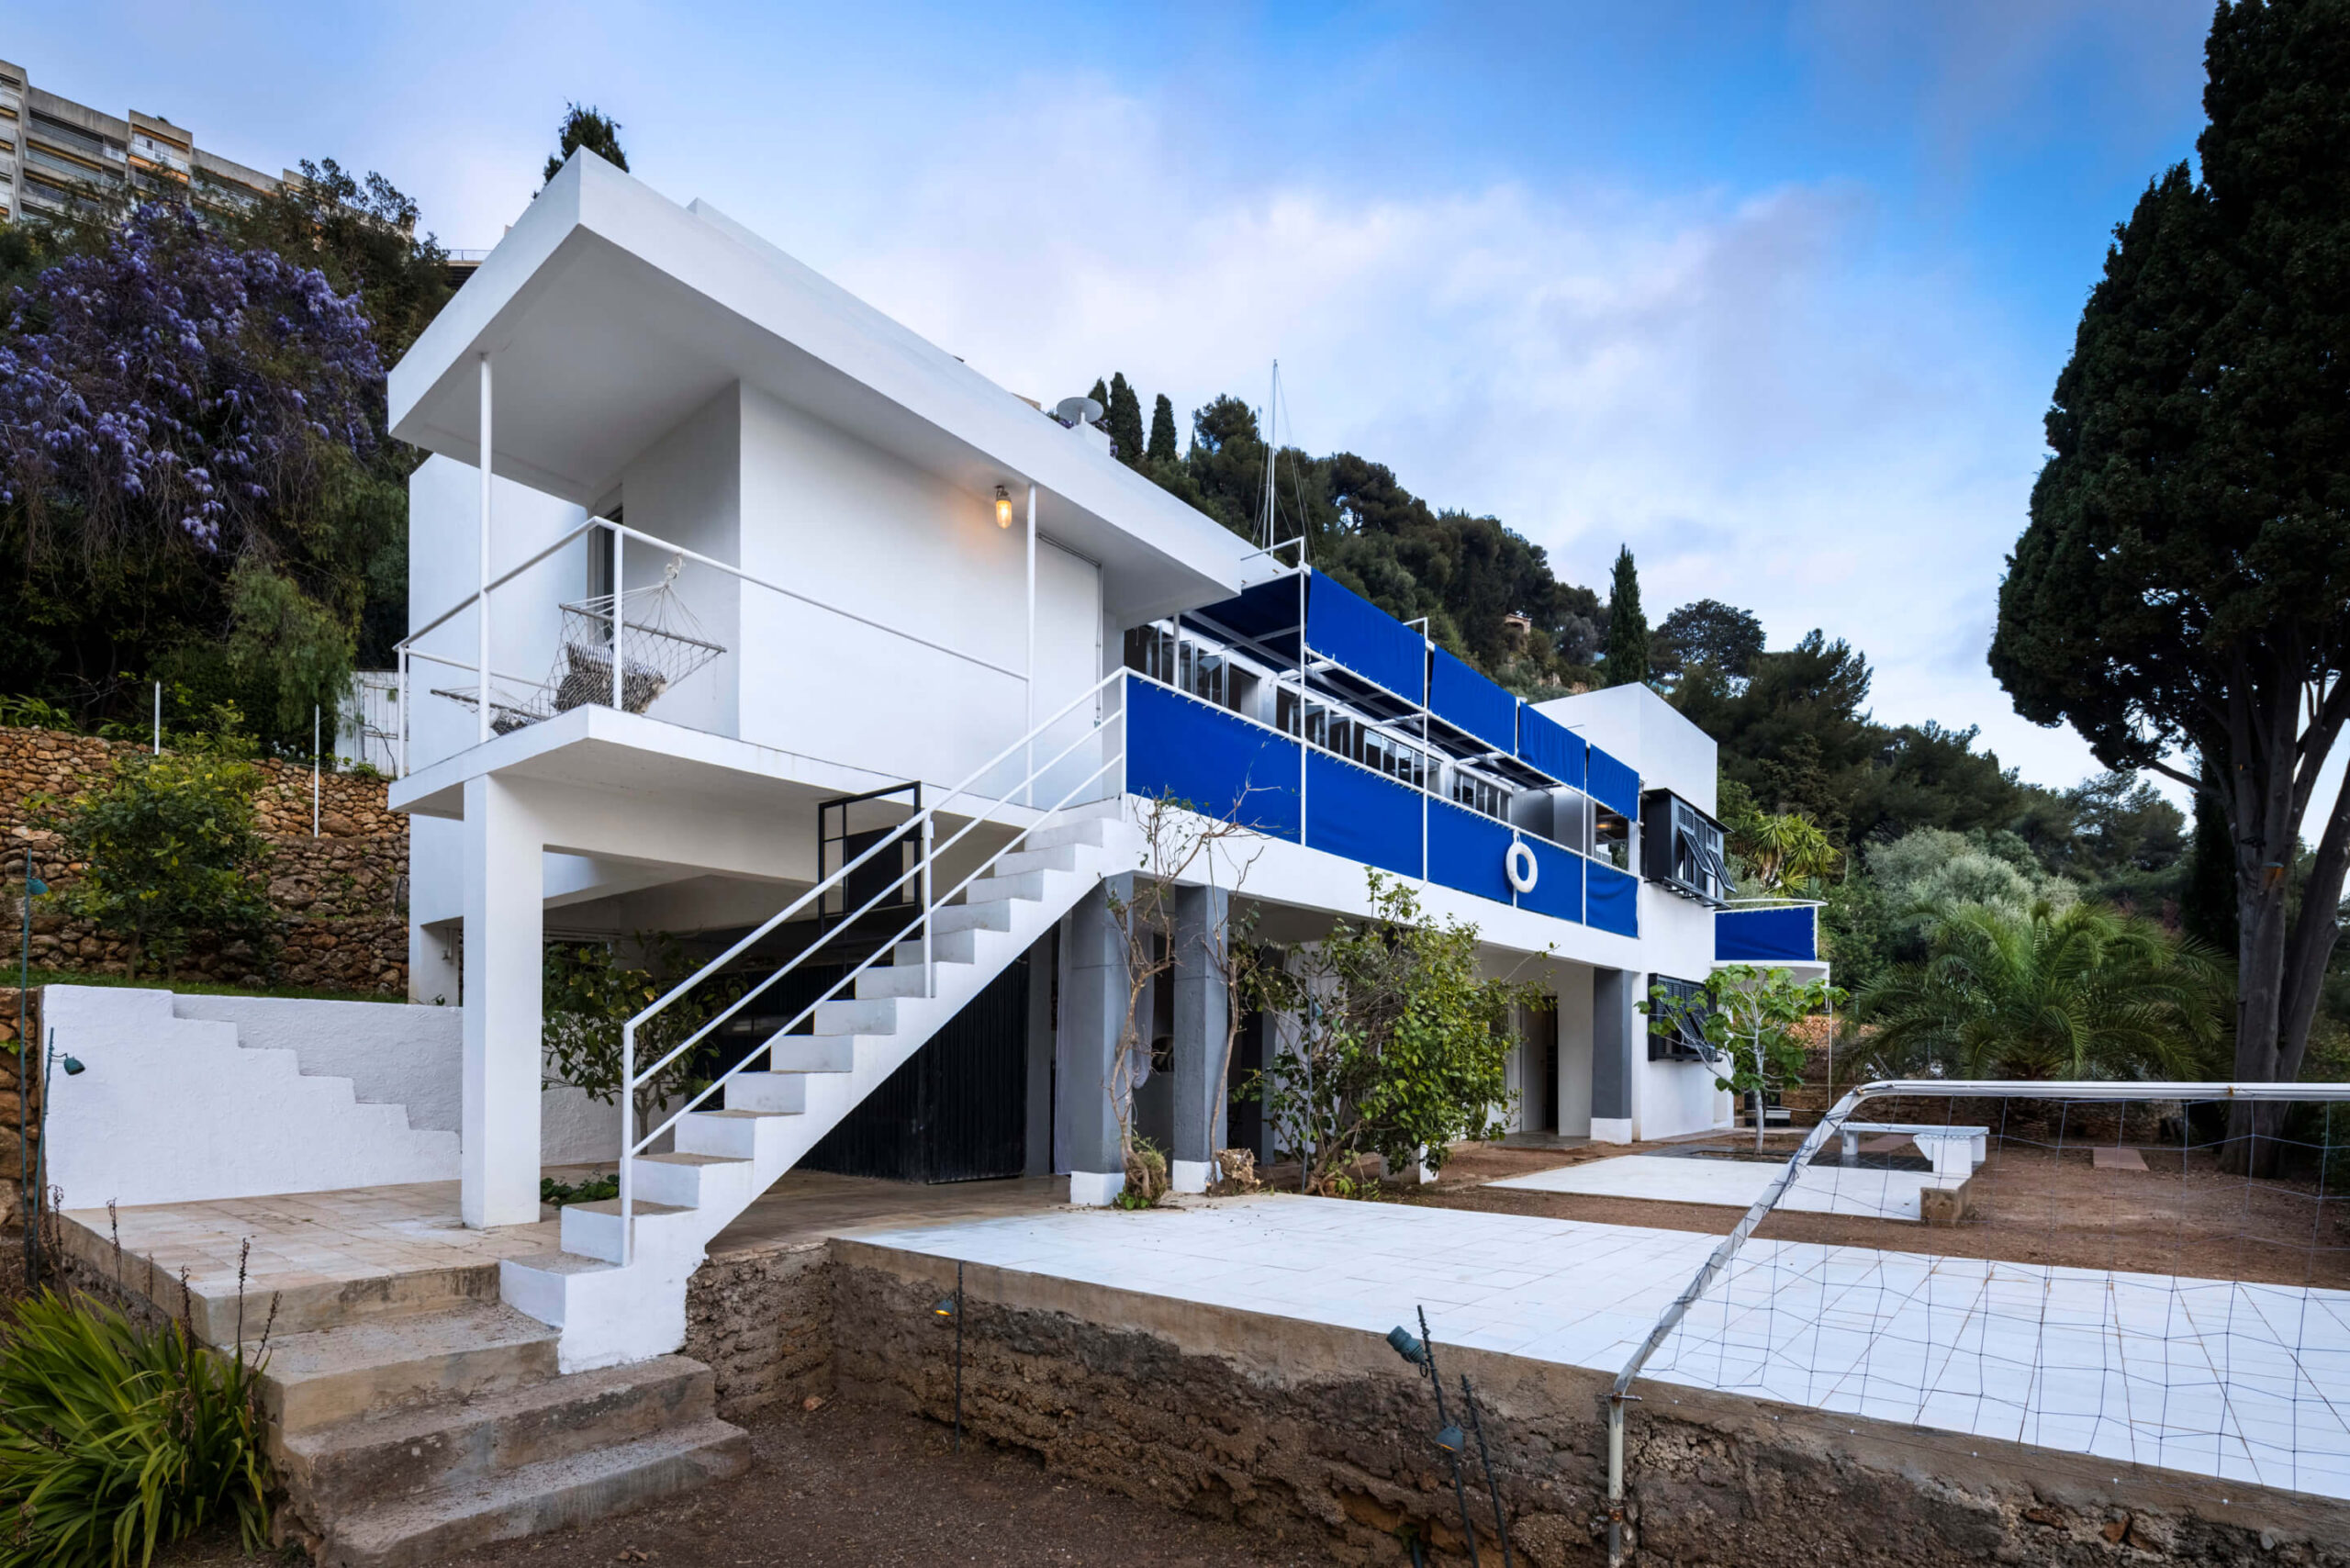 The facade of Eileen Gray's Villa E-1027. The cubist villa is bright white with touches of vibrant blue canvas covering open walkways.